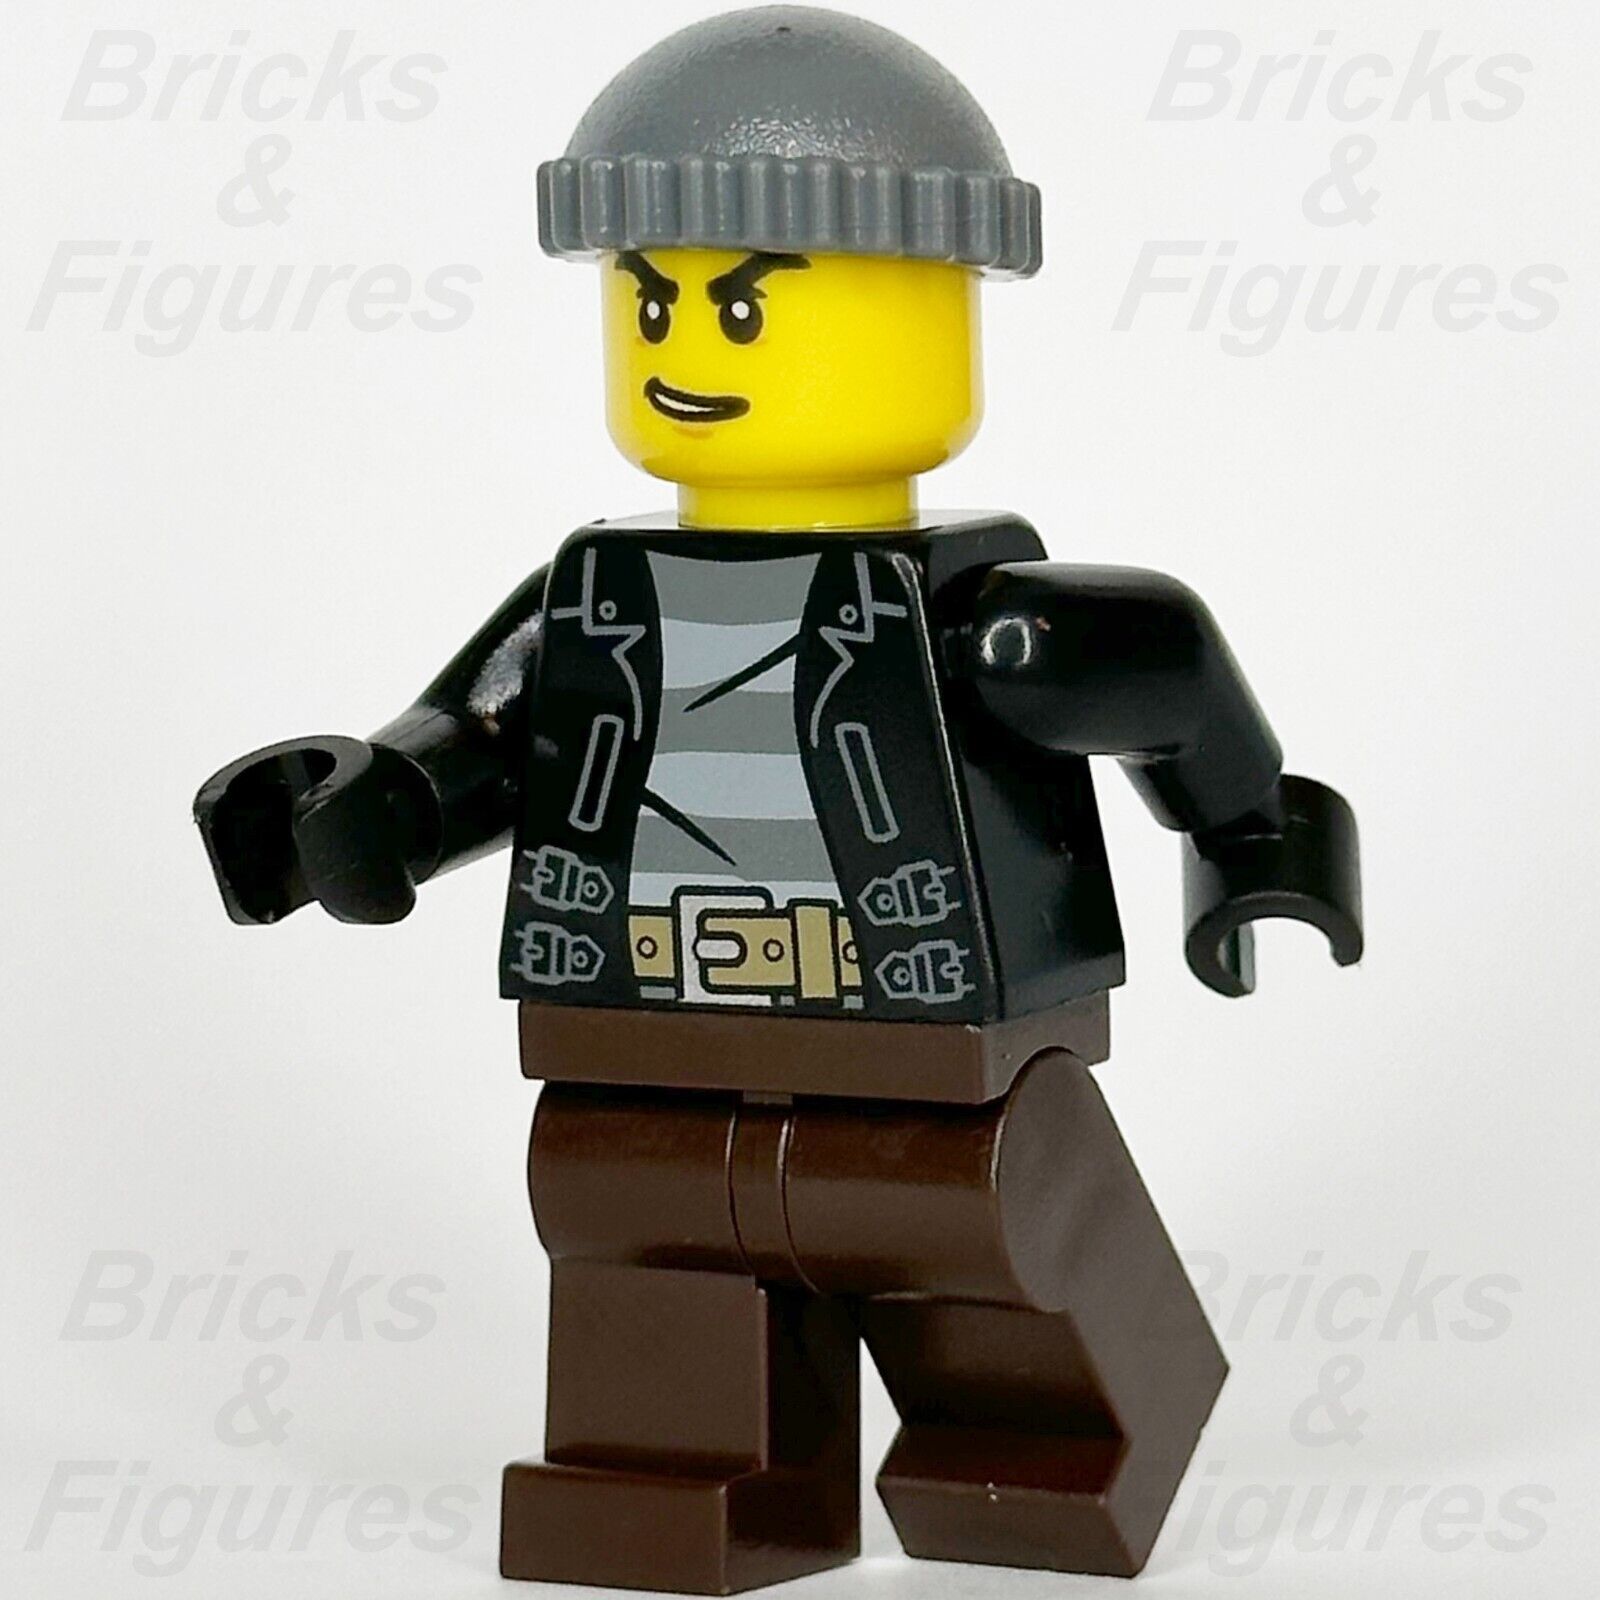 LEGO City Bandit Crook Minifigure Police Town Minifig Male Beanie 60245 cty1133